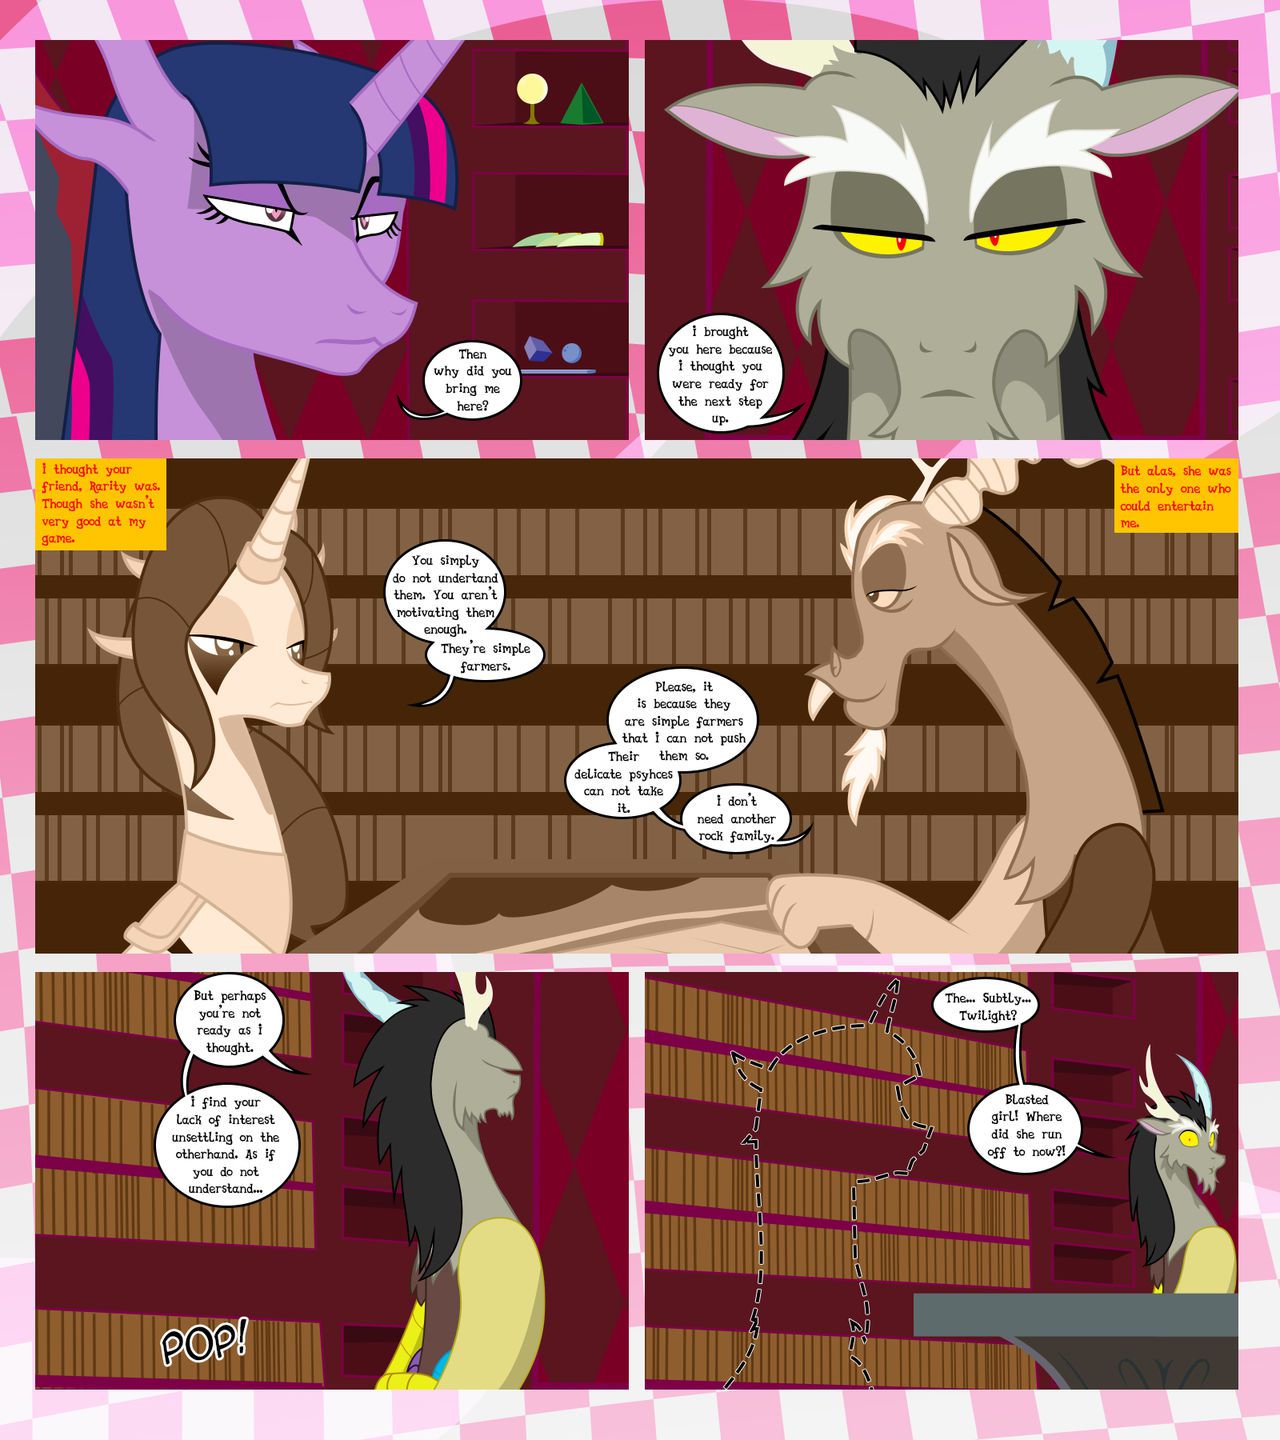 [GatesMcCloud] Cutie Mark Crusaders 10k: Chapter 3 - The Lost (My Little Pony: Friendship is Magic) [English] [Ongoing] 76